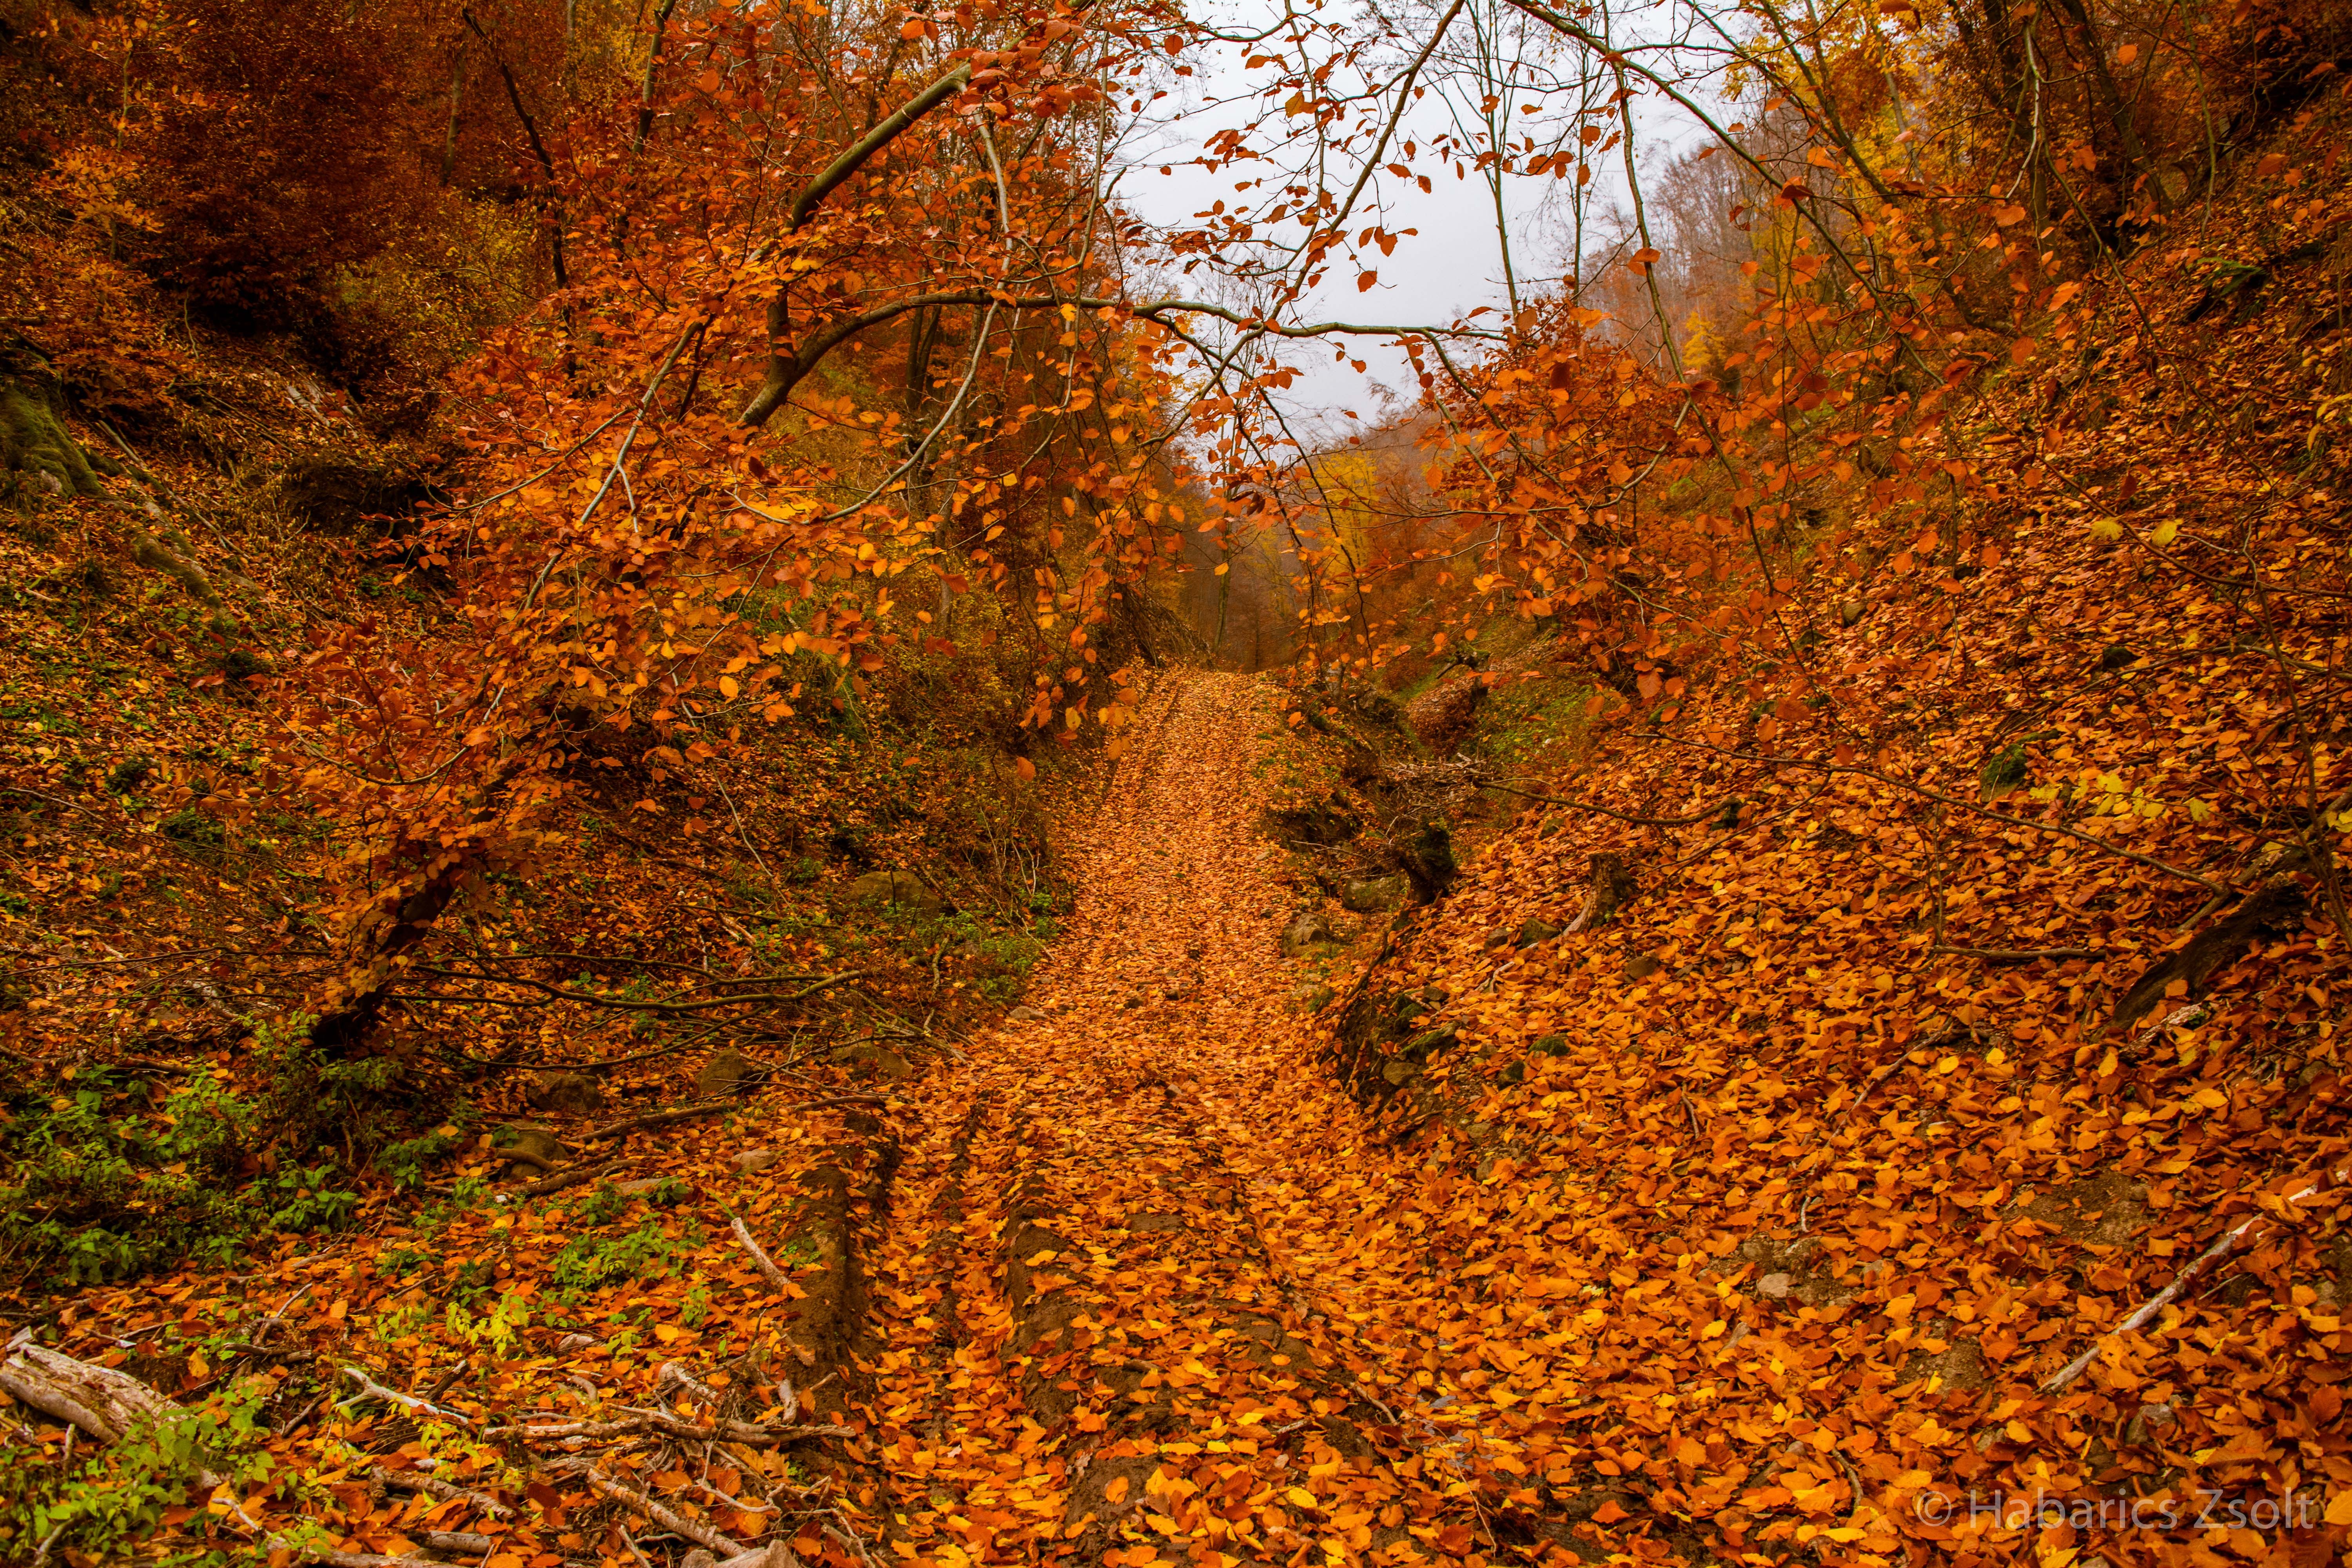 General 6000x4000 forest trees fall leaves nature path fallen leaves plants